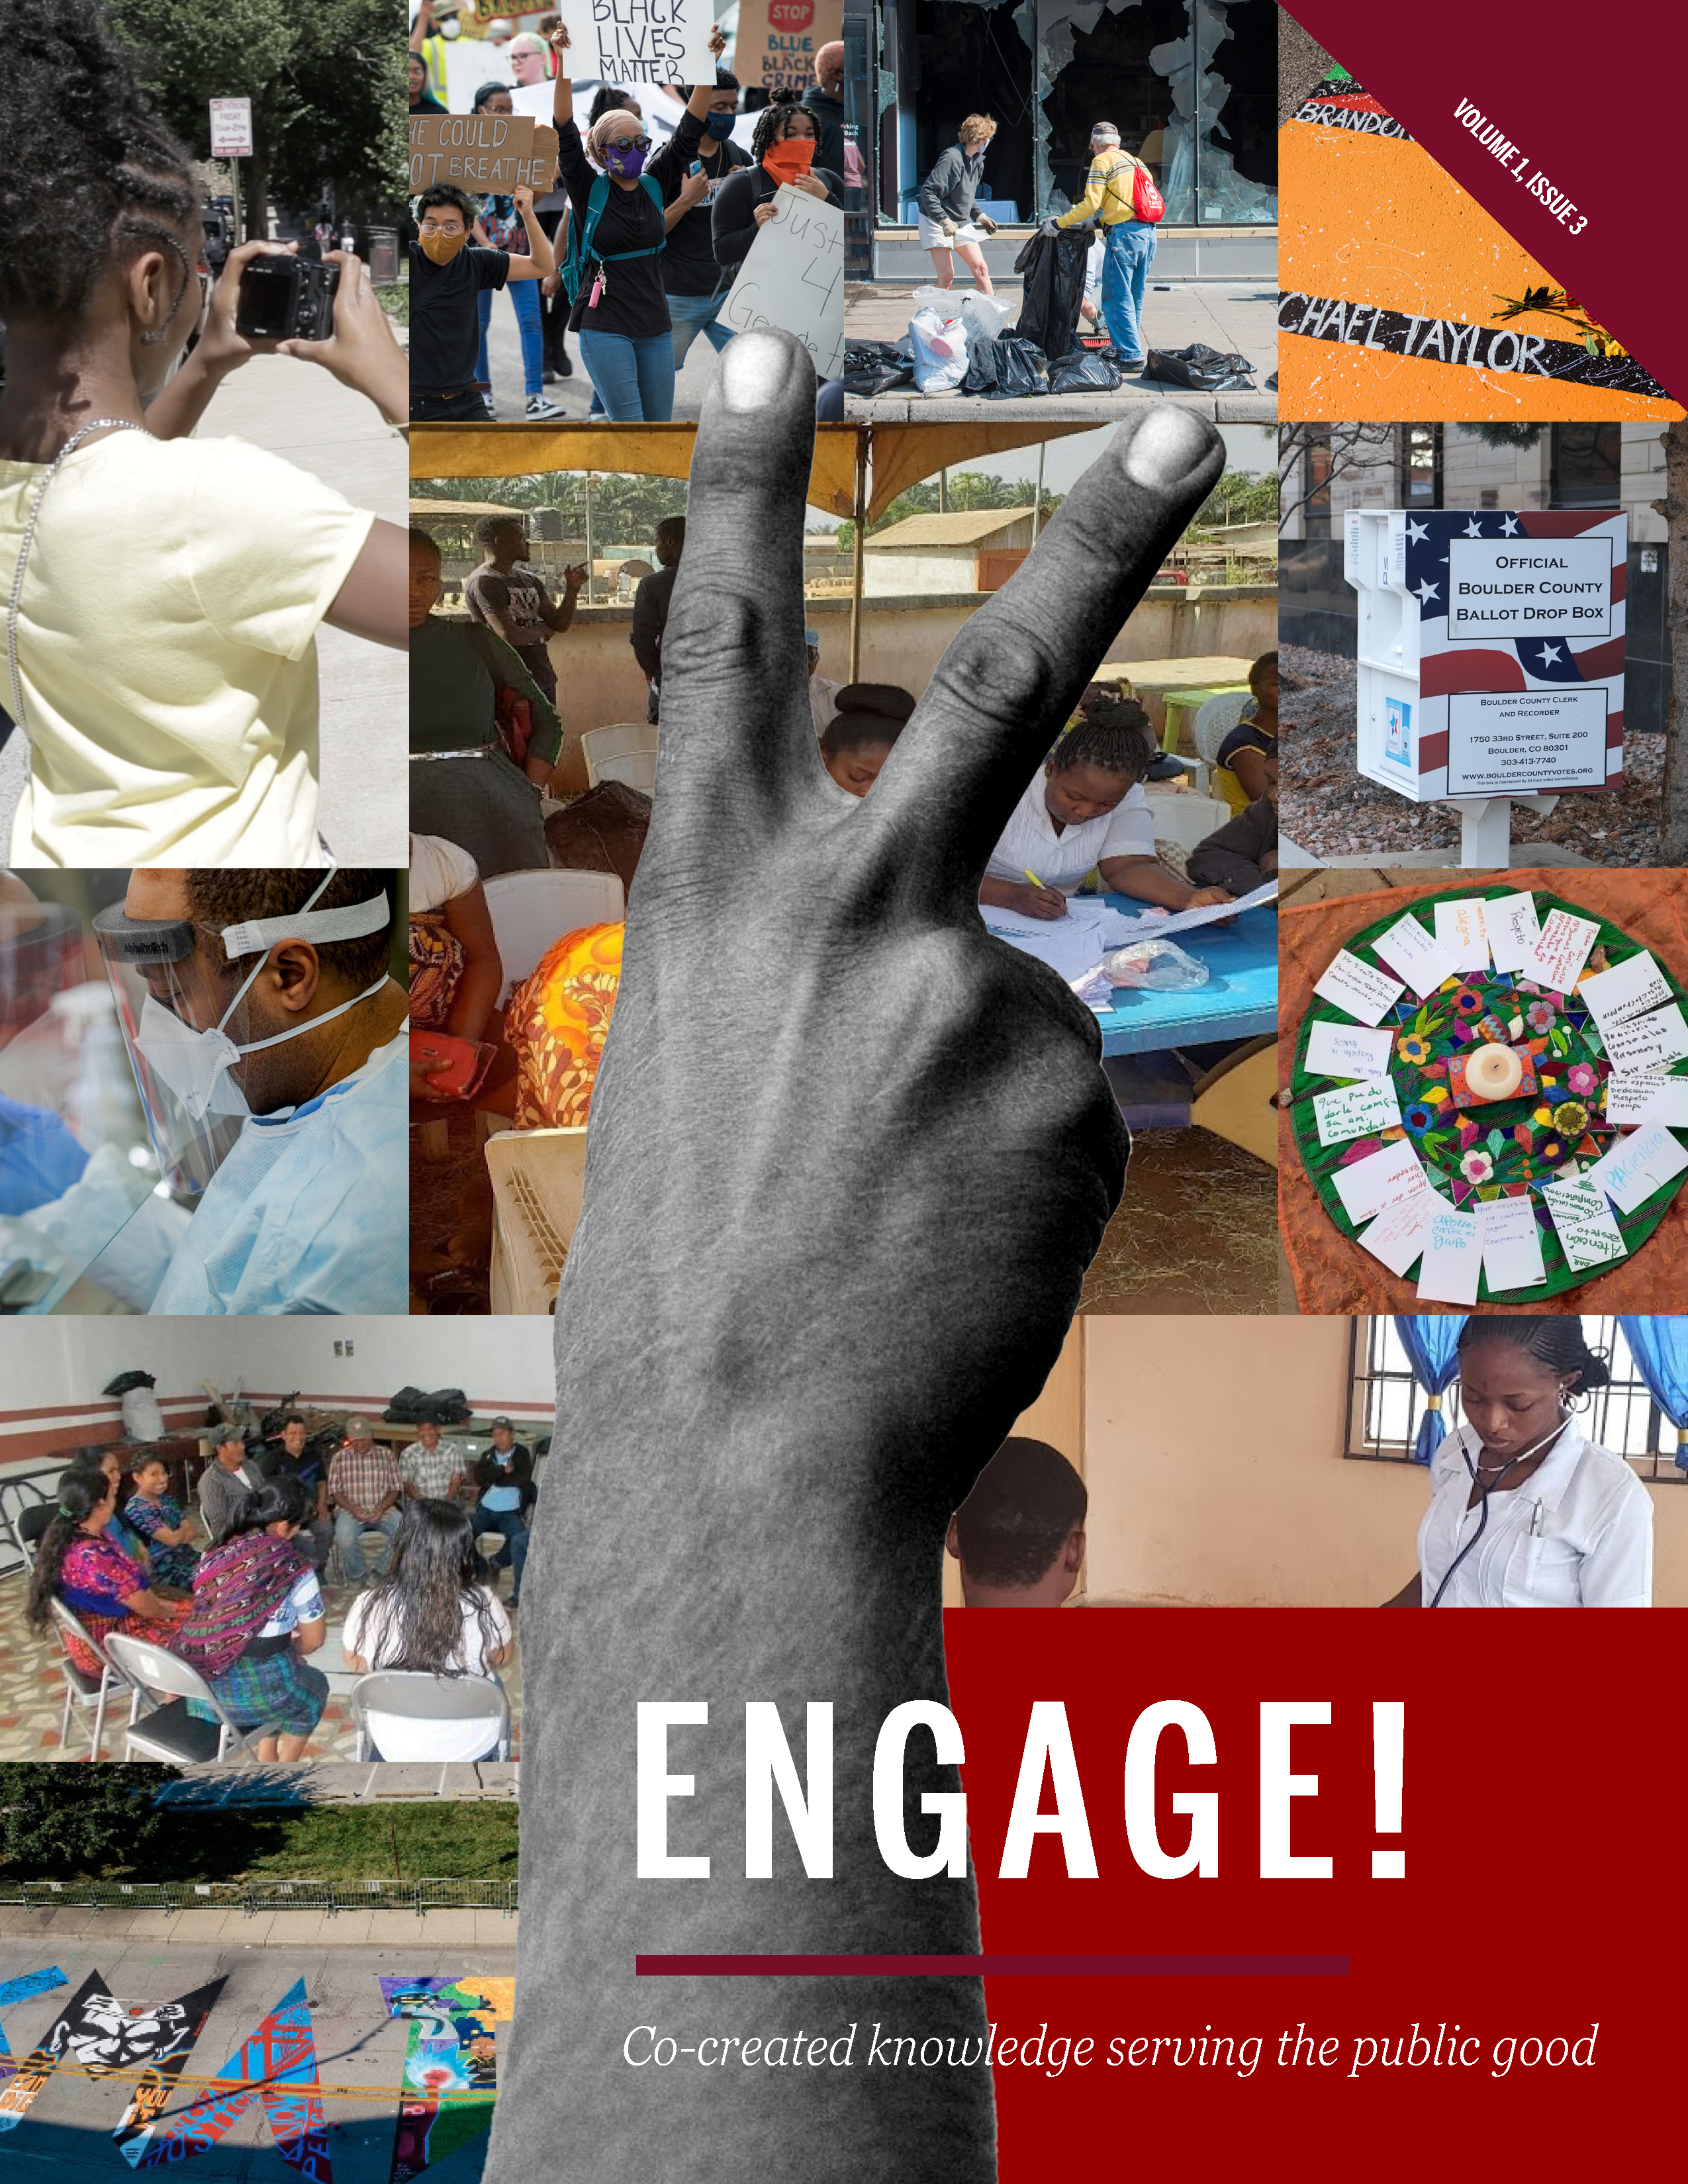 					View Vol. 1 No. 3 (2020): ENGAGE! Co-created knowledge serving the public good
				